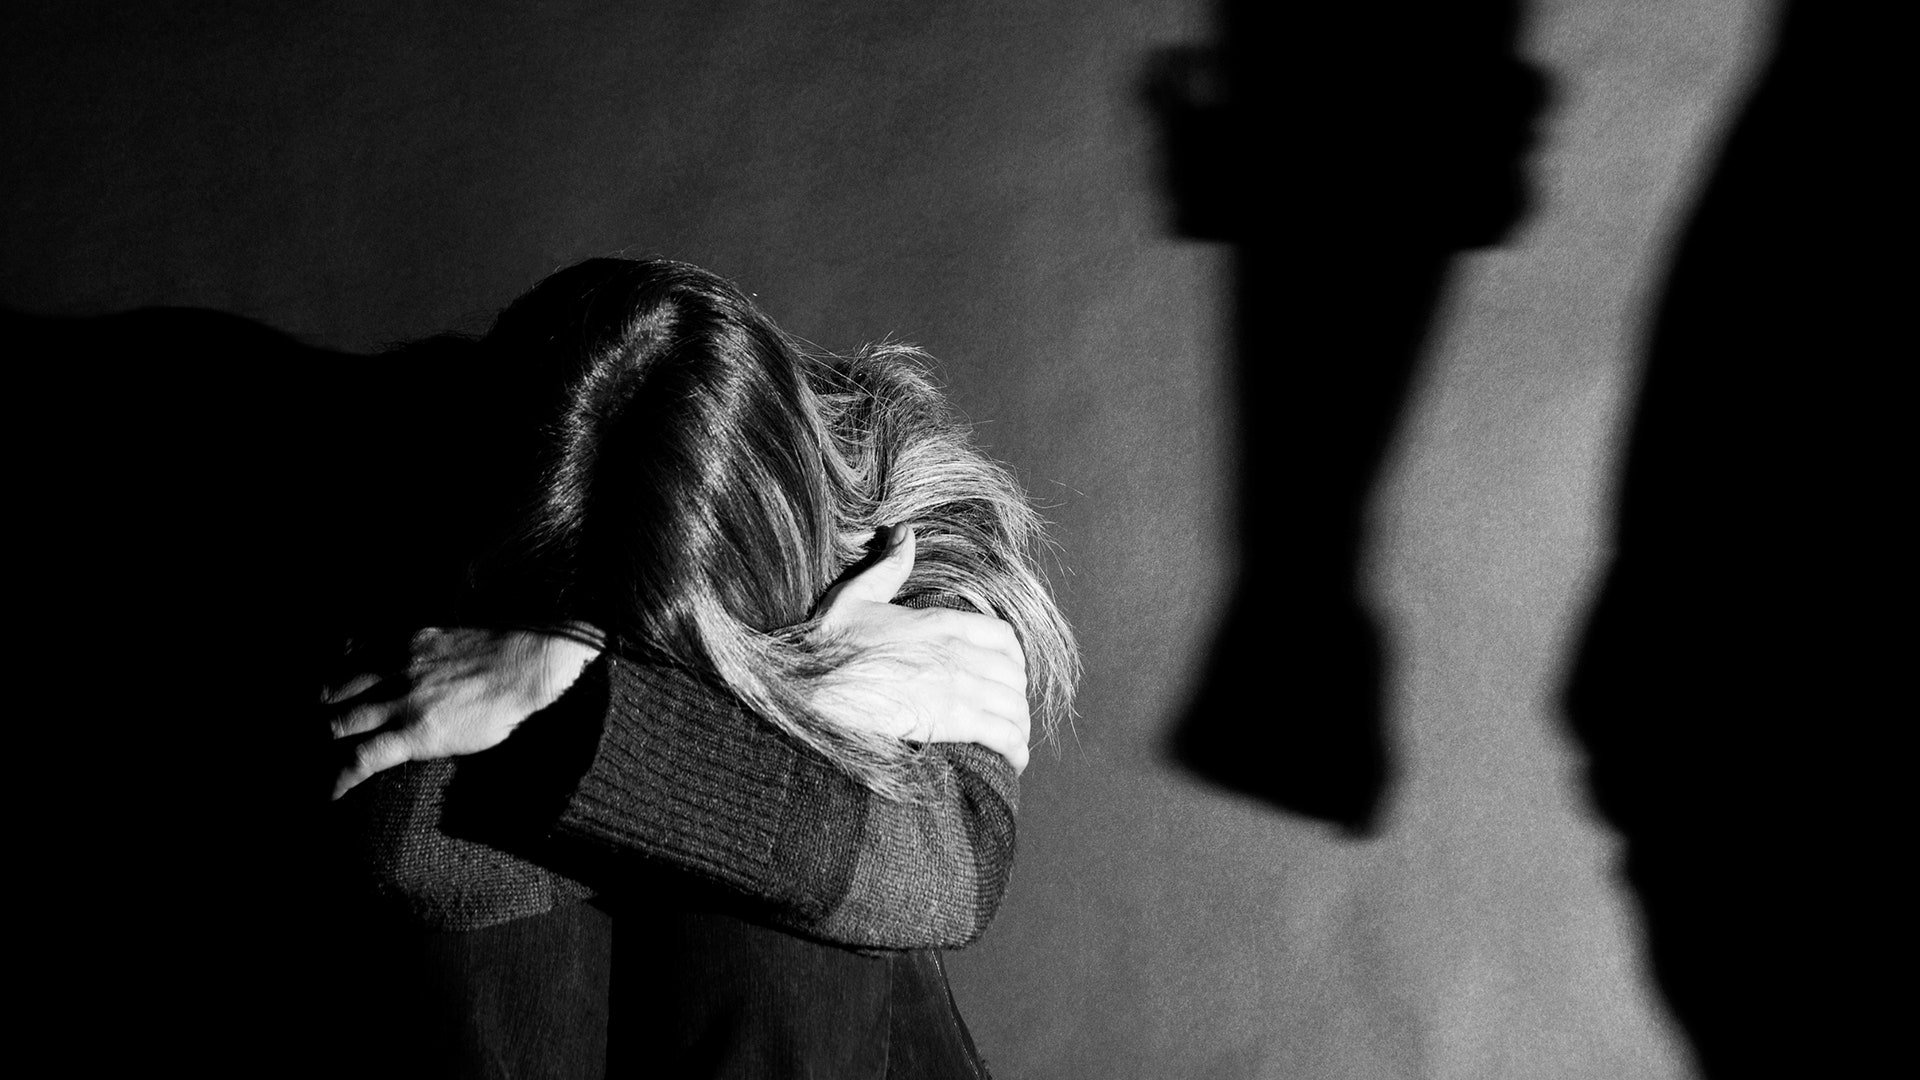 Domestic abuse: 'I was gripped by terror he would share something so intimate'